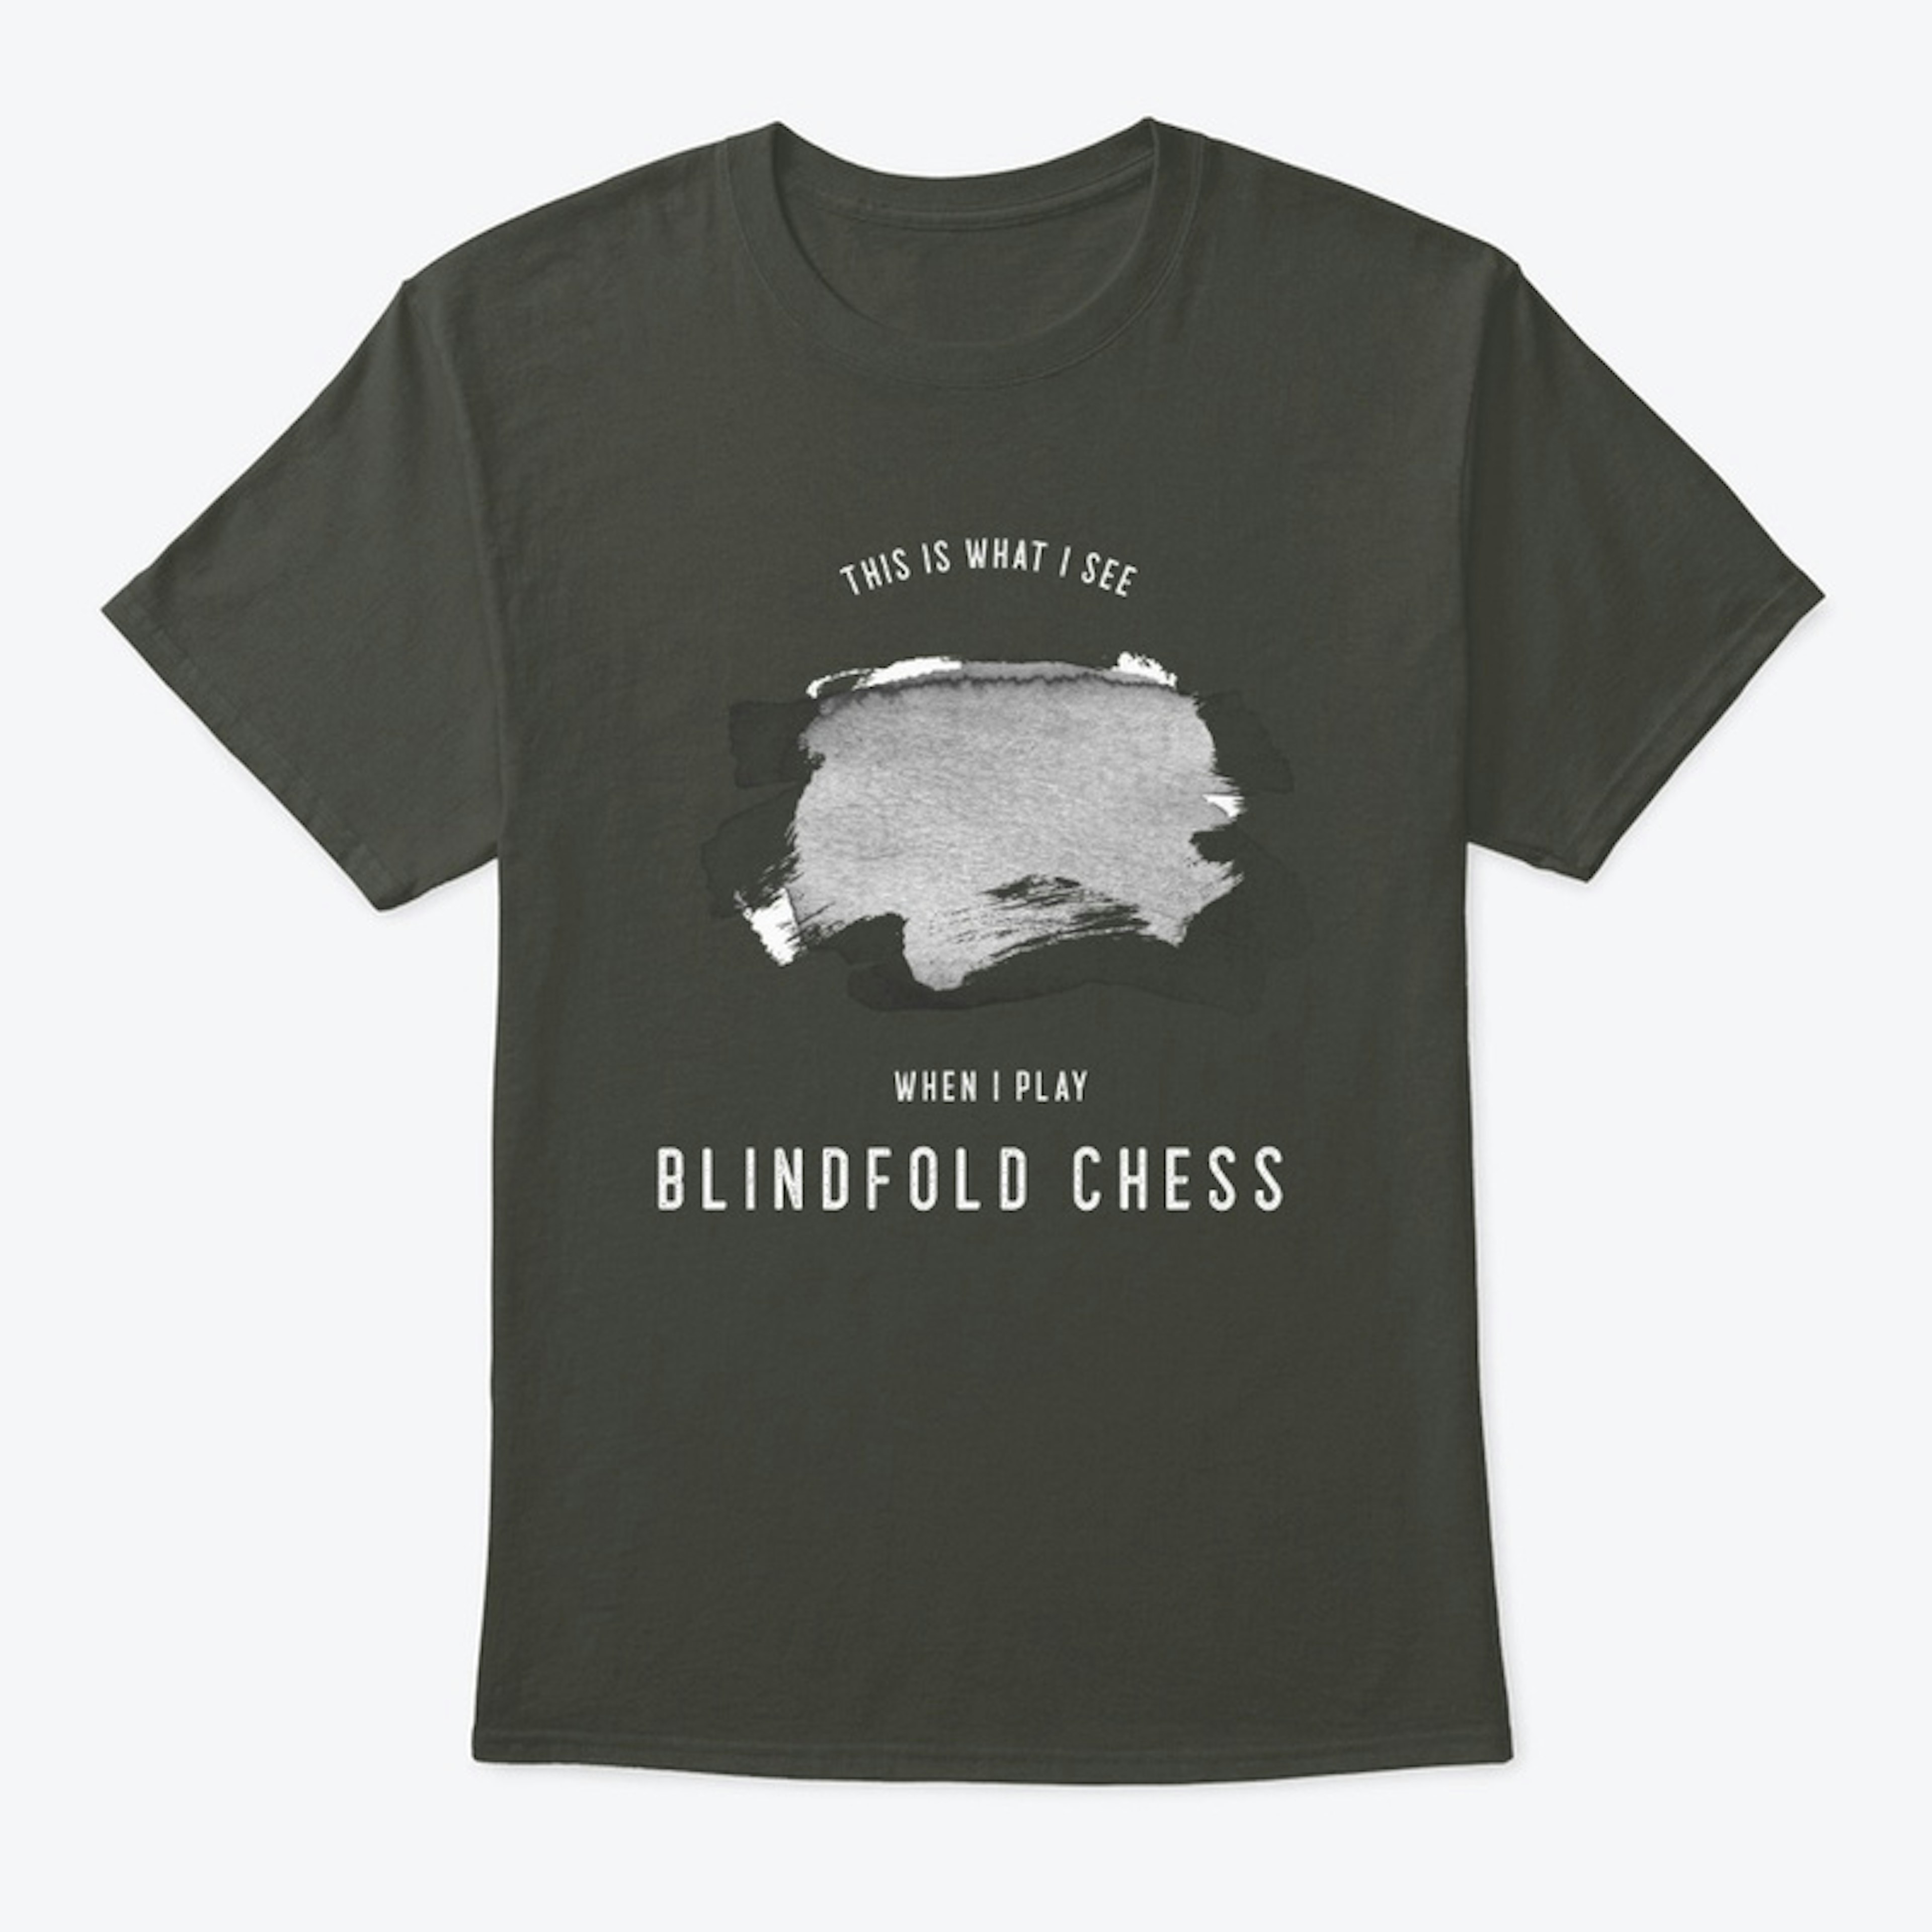 Blindfold Chess is Hard